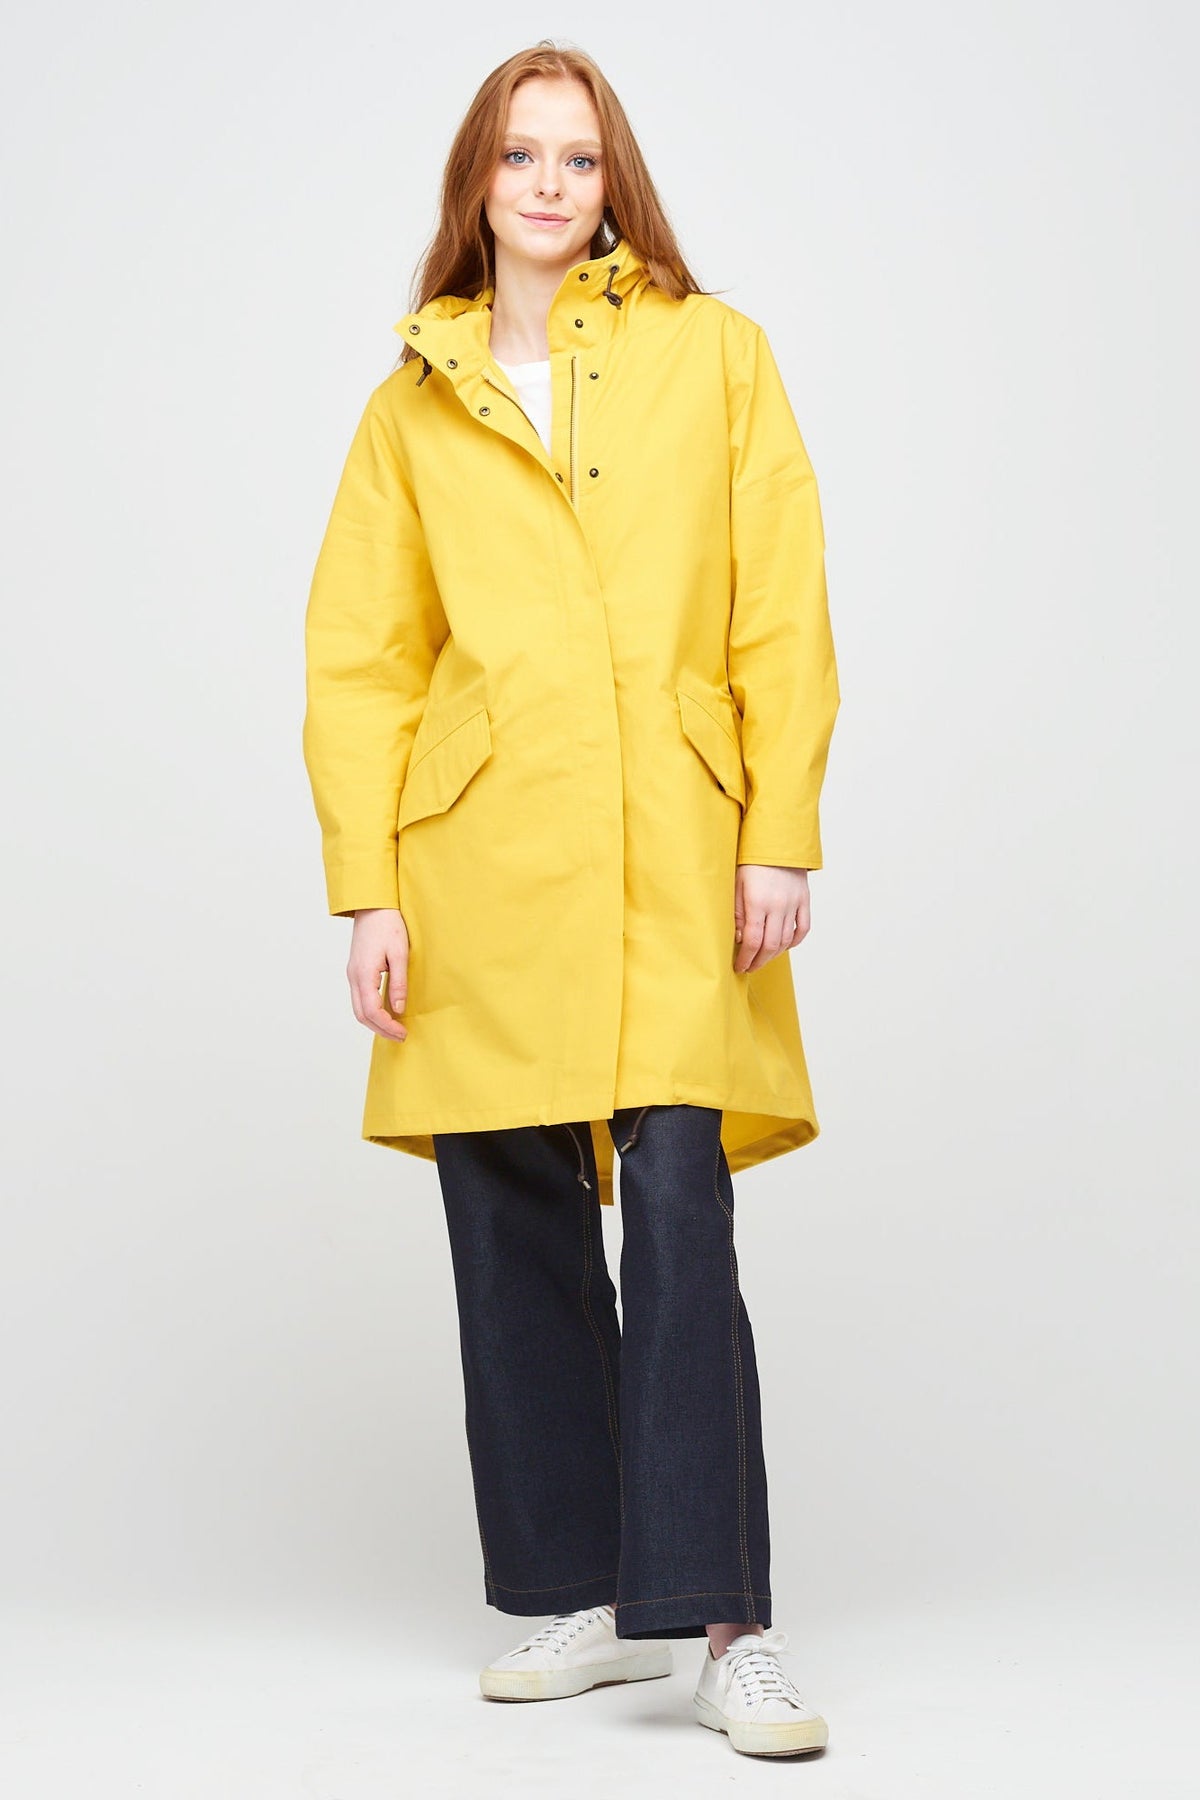 
            a young, white female model with ginger hair wearing long yellow parka partially zipped up. The parka is styled with indigo jeans and a white trainer.